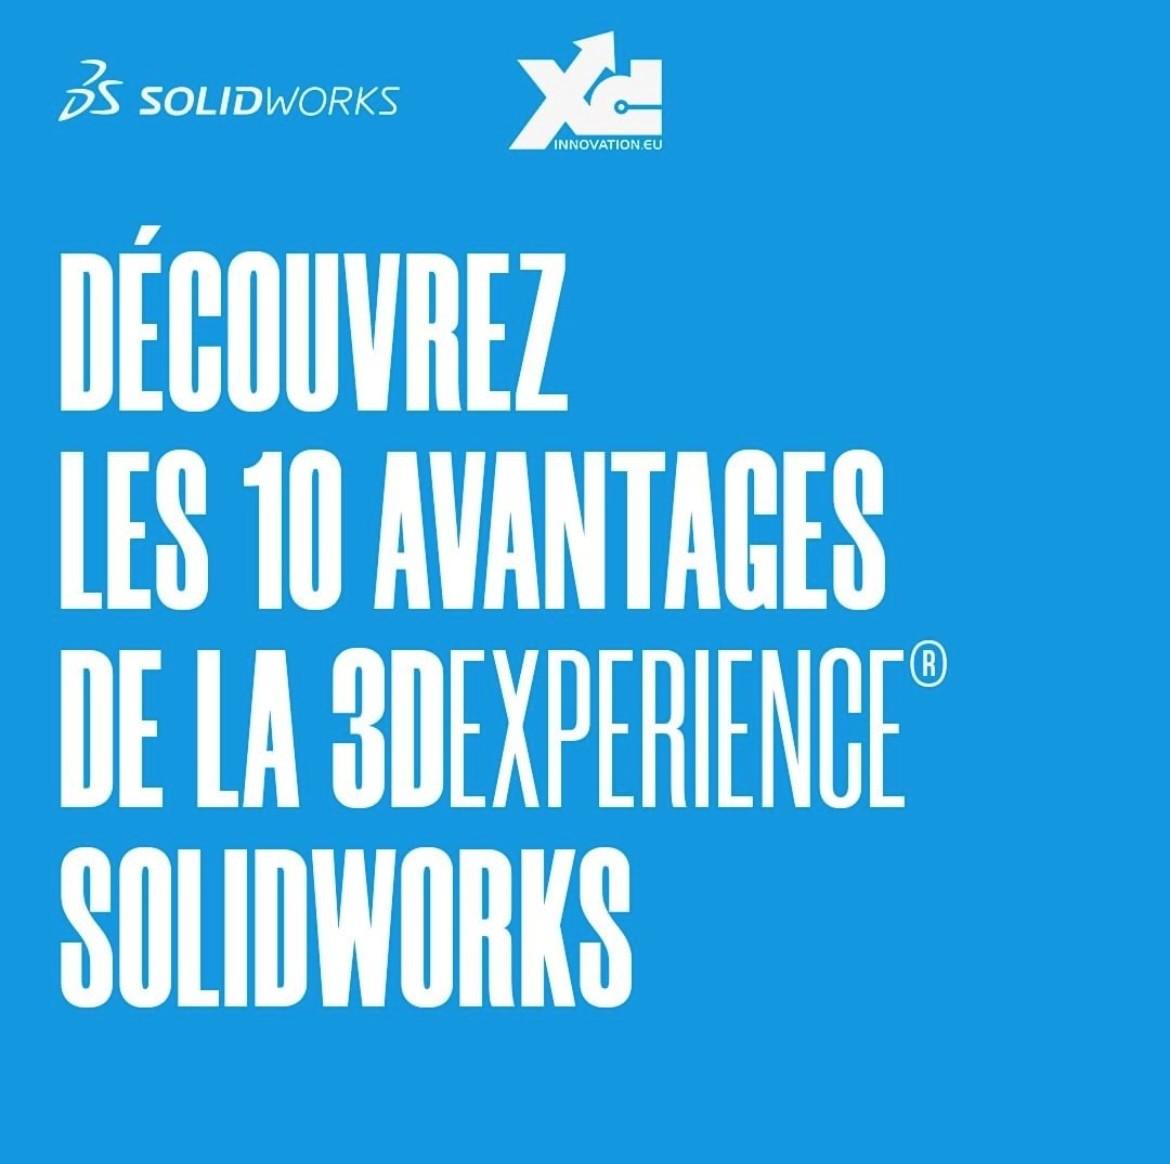 Solidworks Connected